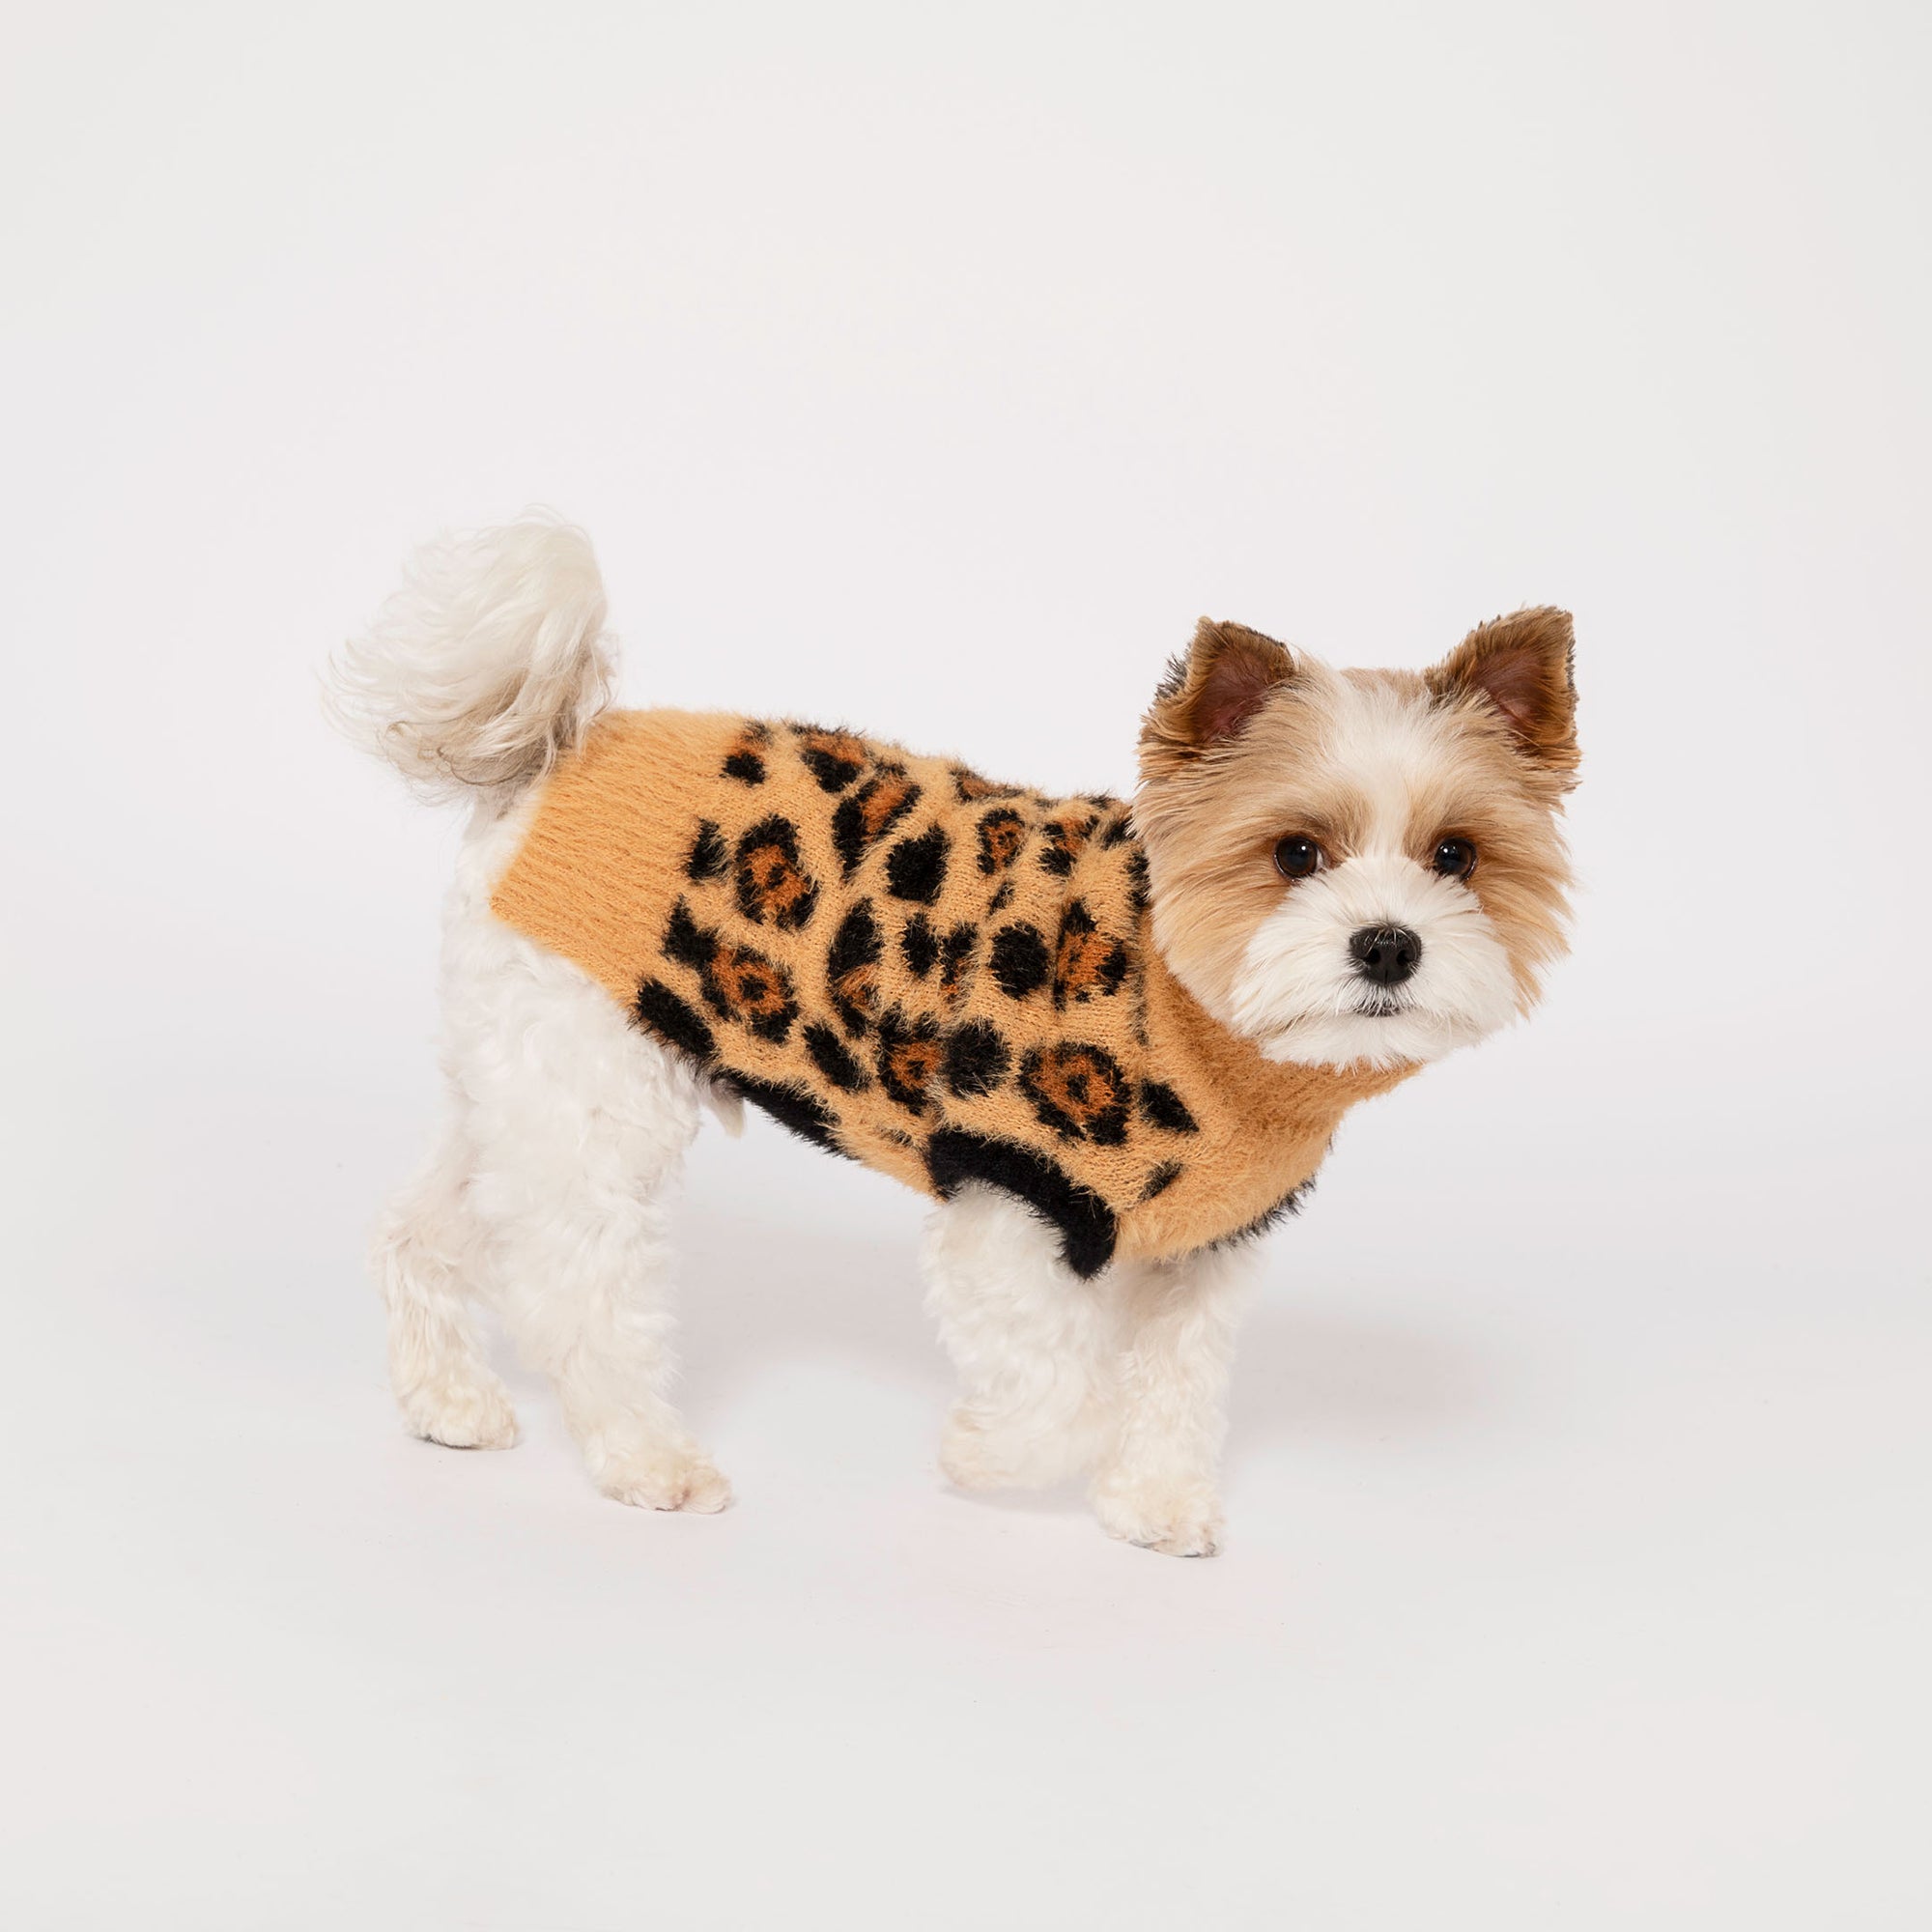 "Small terrier mix dog with a fluffy white coat wearing a chic tan sweater with a leopard print pattern, attentively standing and looking forward, against a white background.